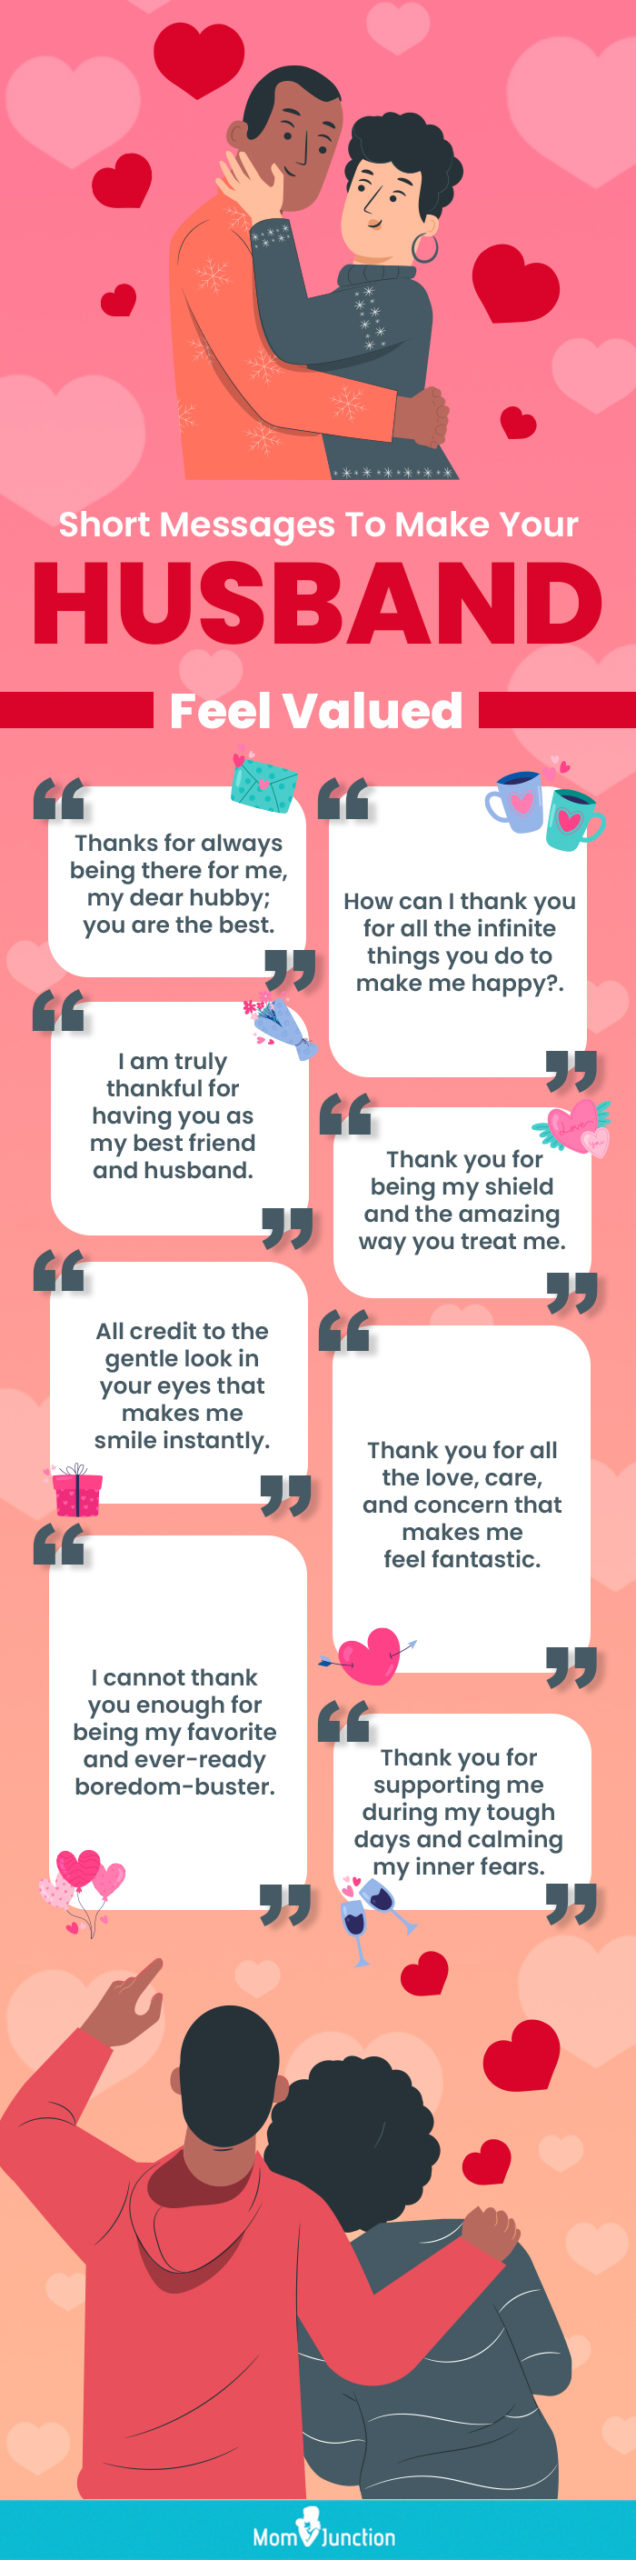 short messages to make your husband feel valued (infographic)